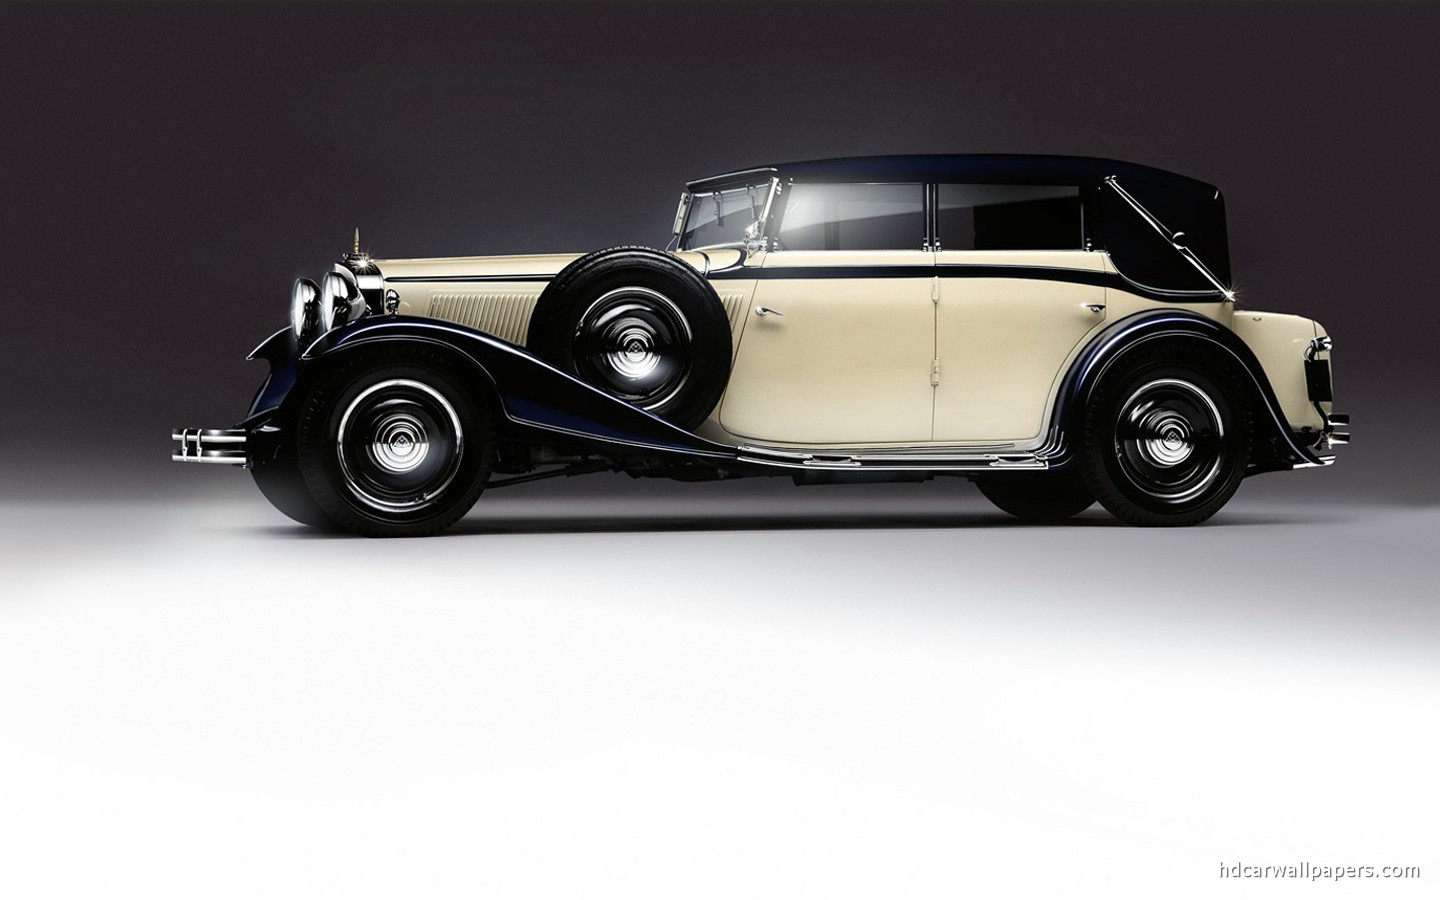 This is also Classic Car Wallpaper This car has white and black